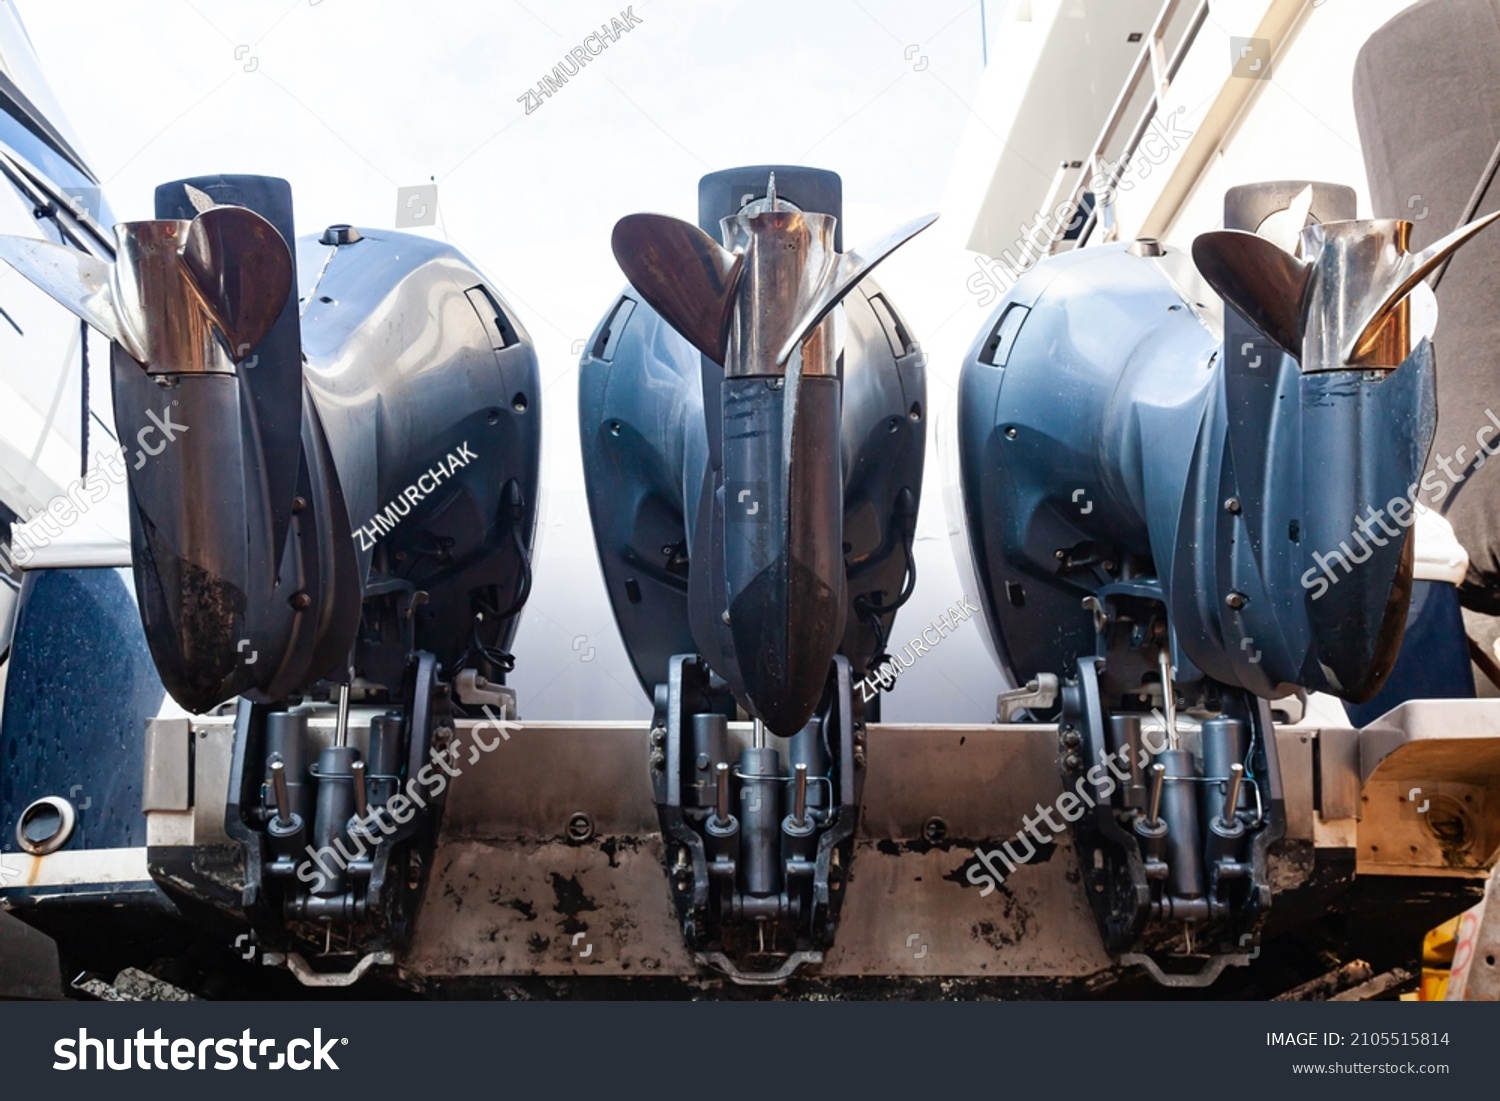 Three outboard motors mounted on the stern of a motor boat, bottom view. #2105515814